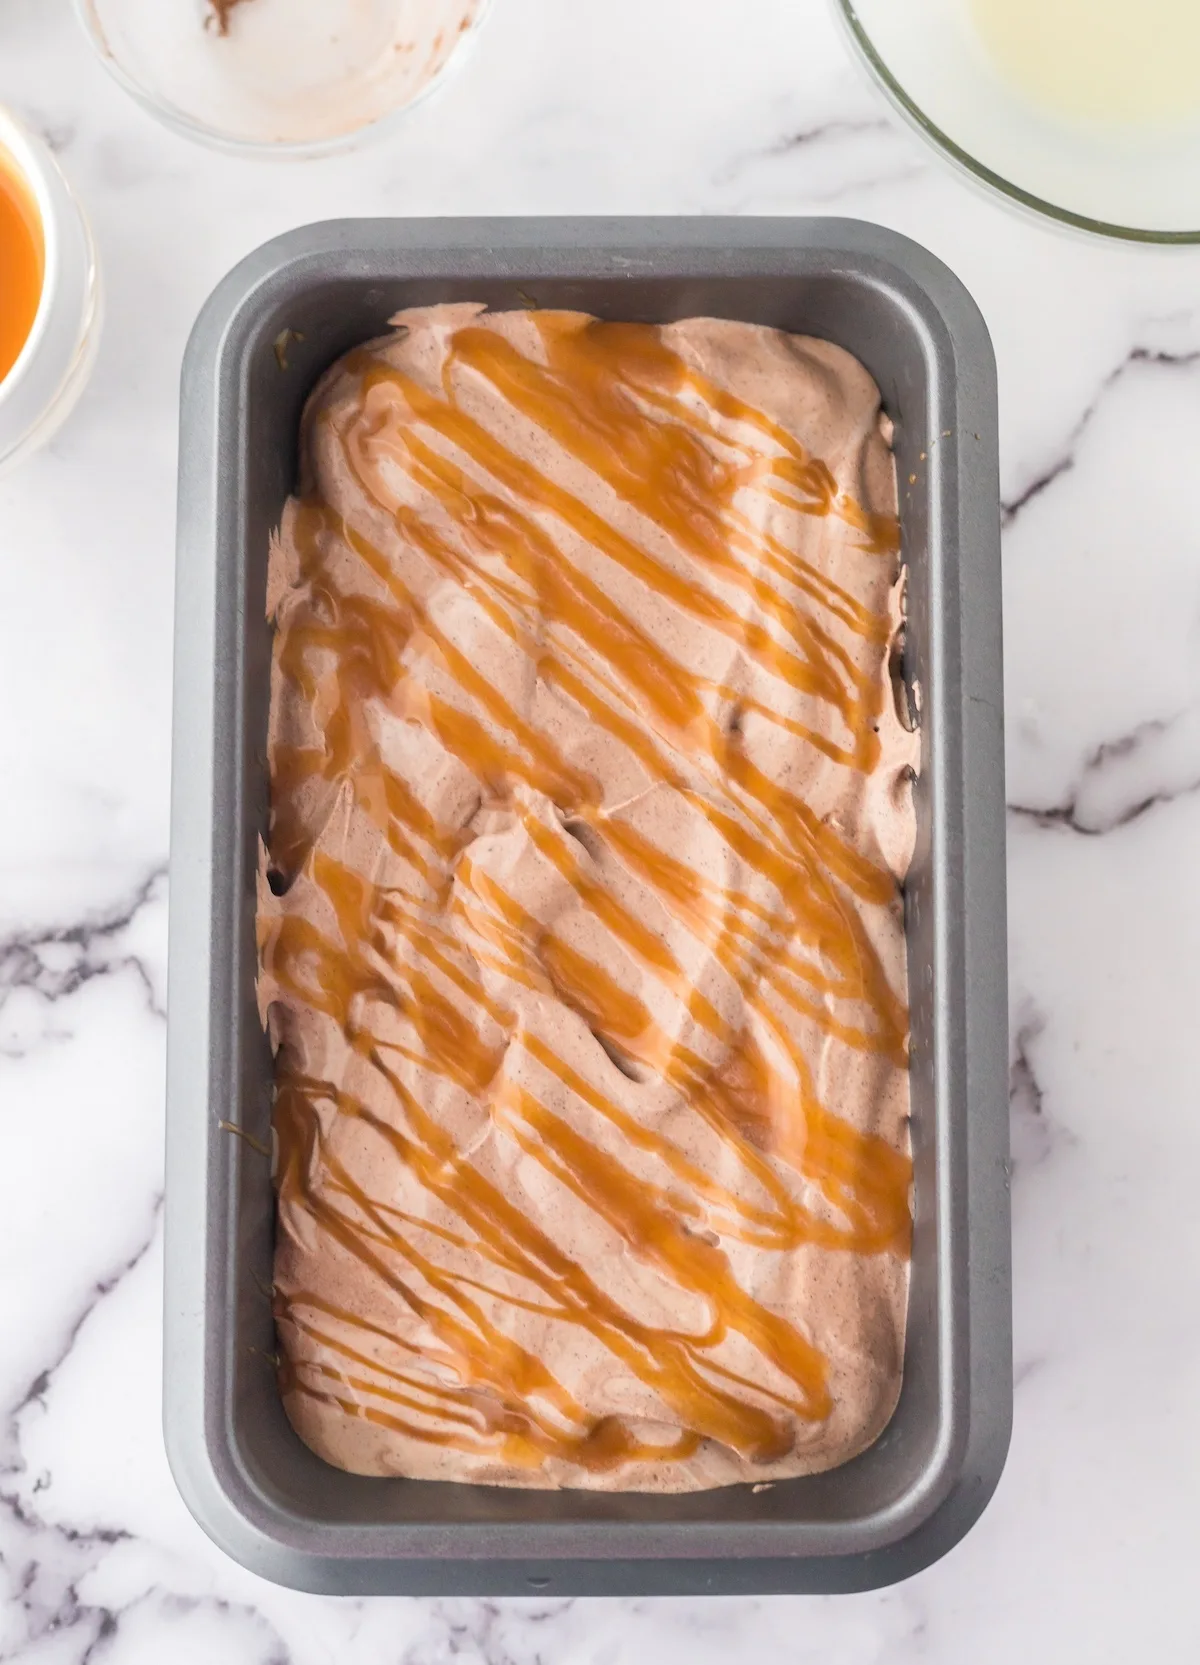 Chocolate ice cream with caramel drizzled over the top